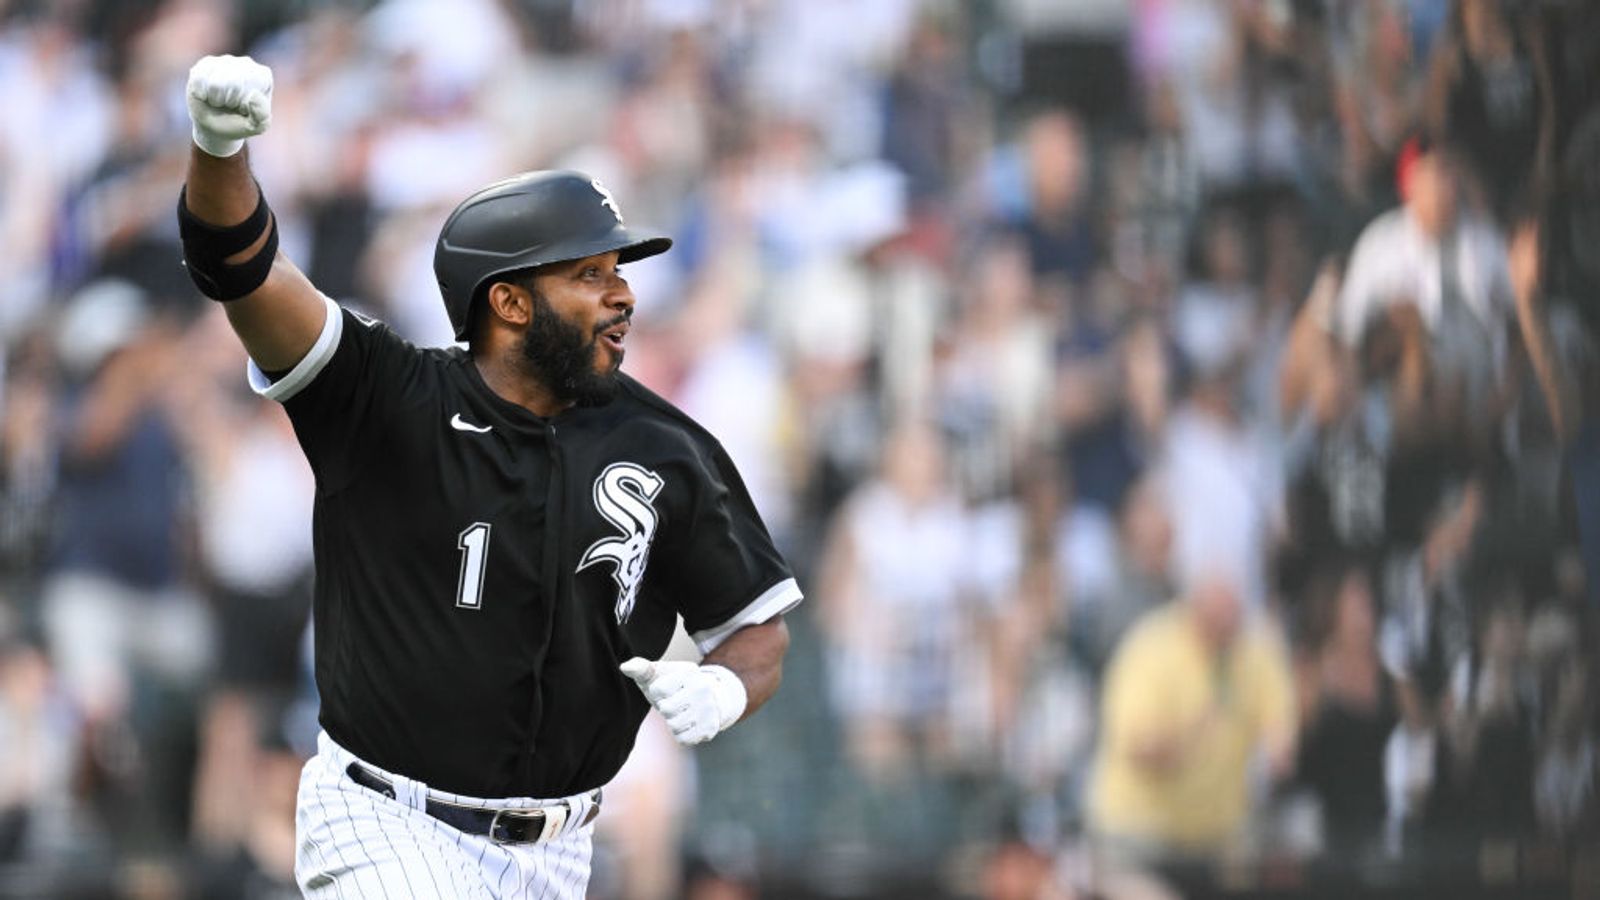 BSJ Game Report: White Sox 5, Red Sox 4 - Late inning magic smothered out  by Elvis Andrus' walkoff hit